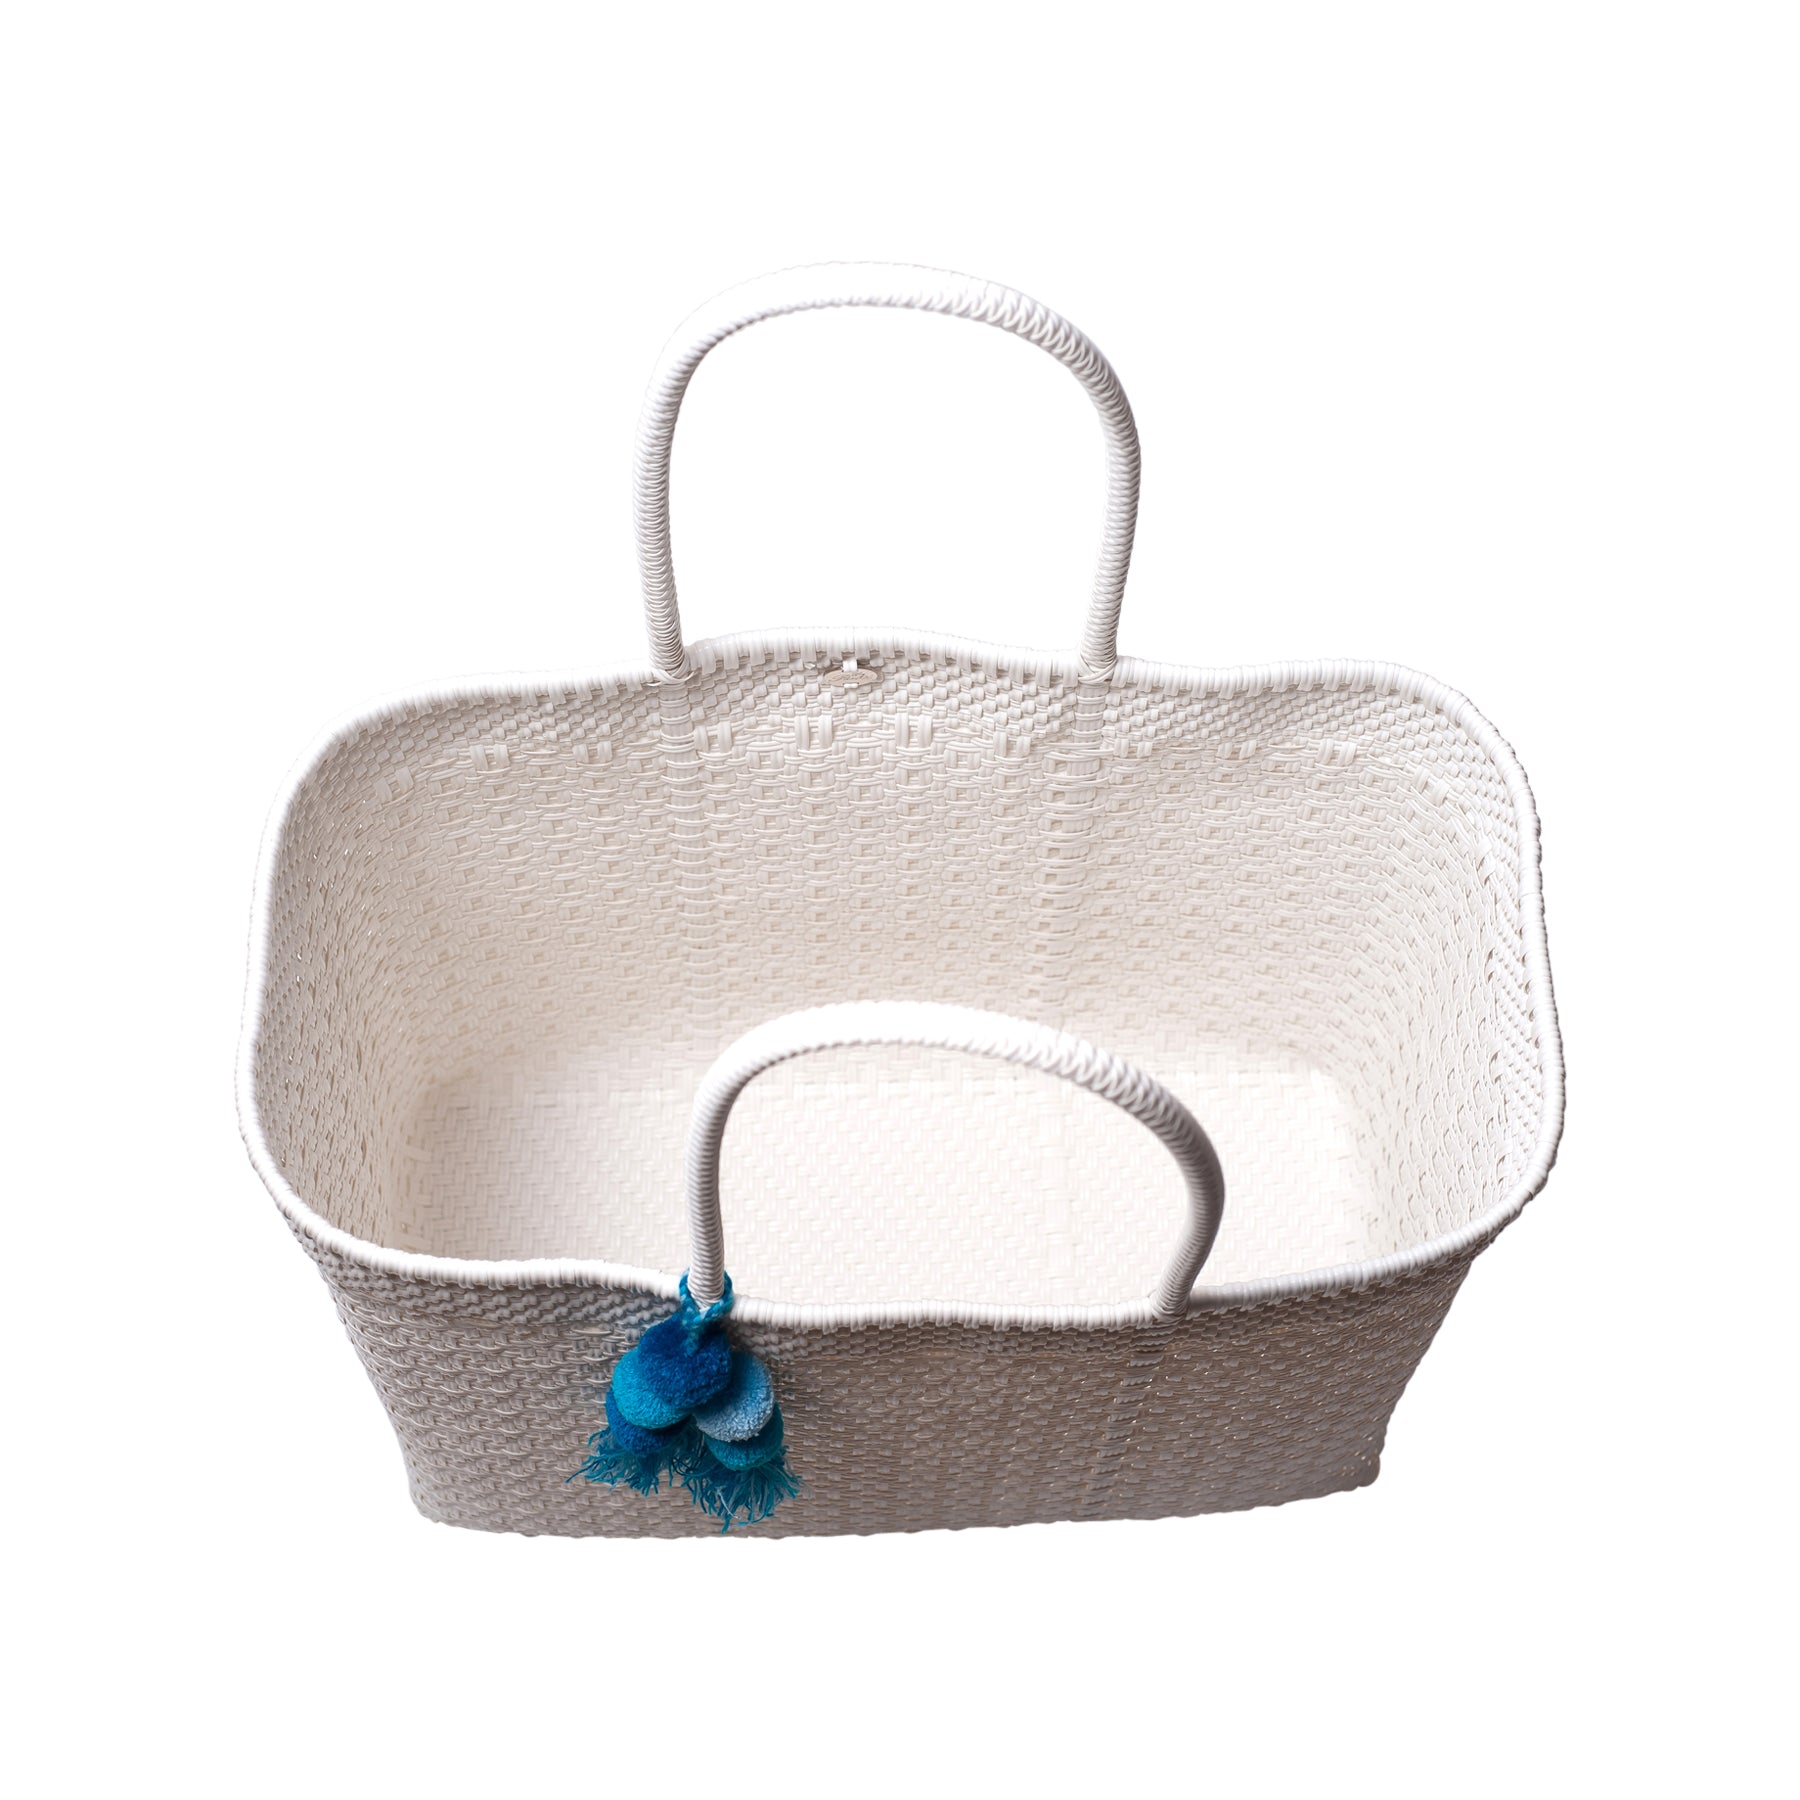 Large Open Woven White Tote